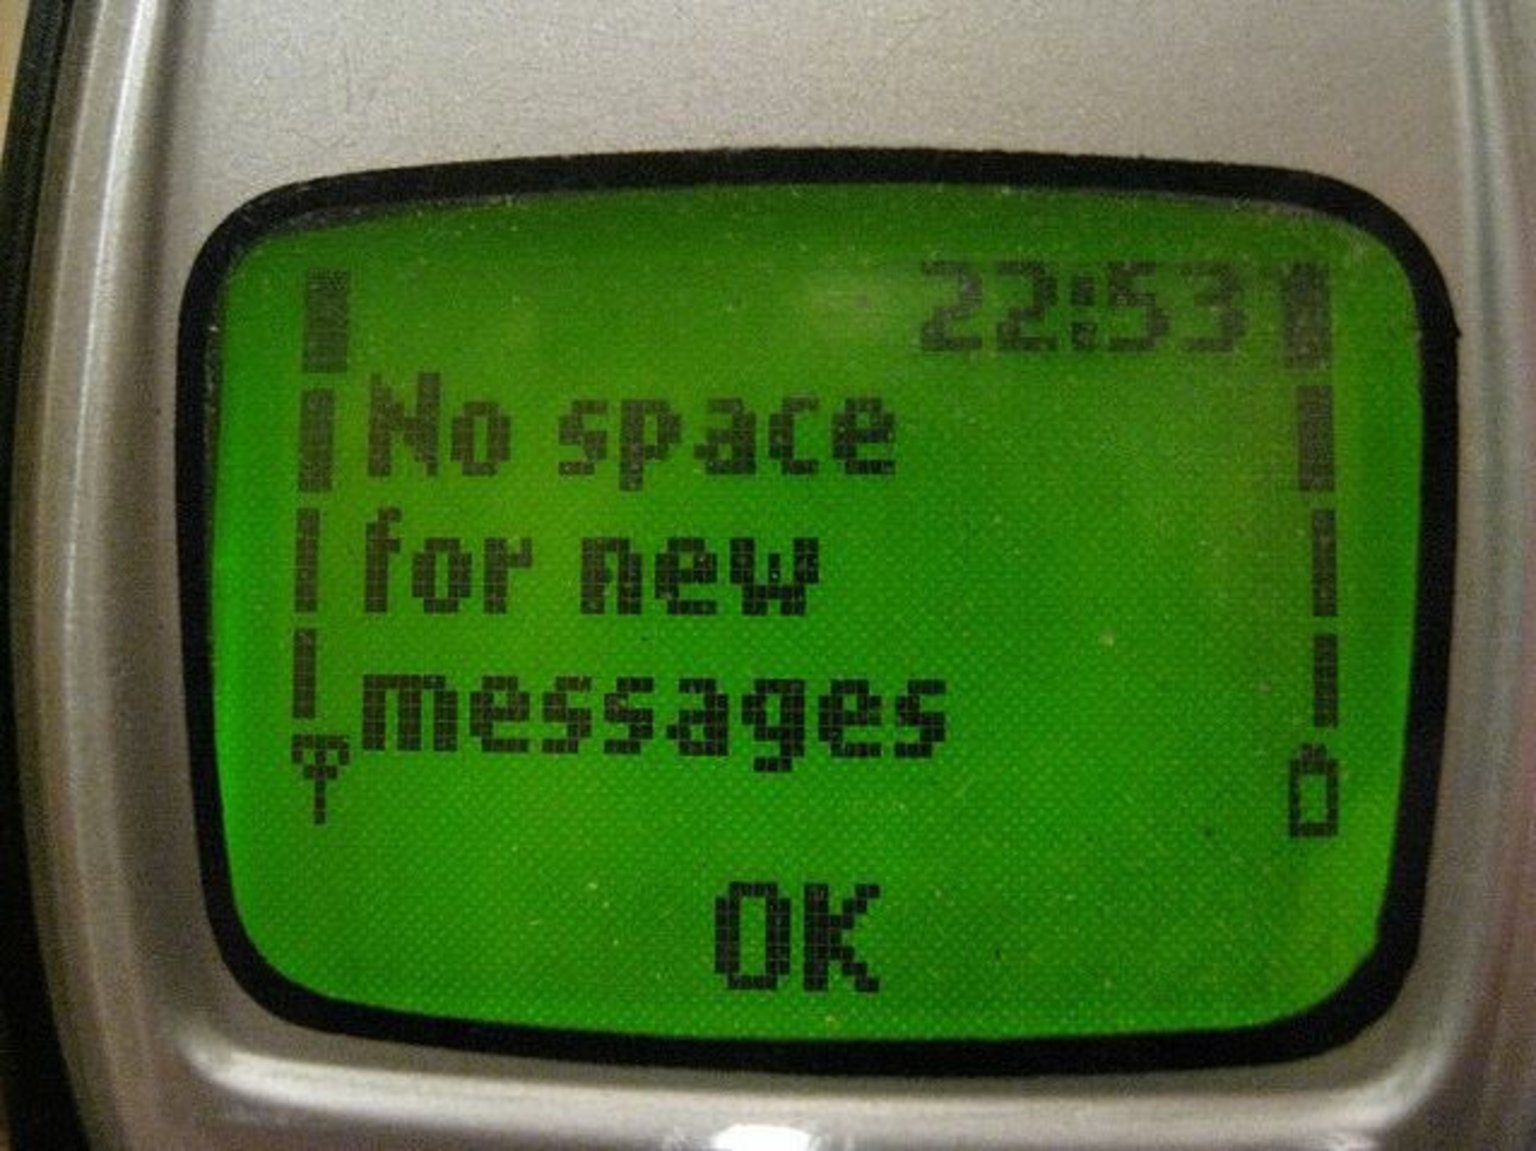 2 new messages. Nokia no Space for New messages. No Space for New messages.